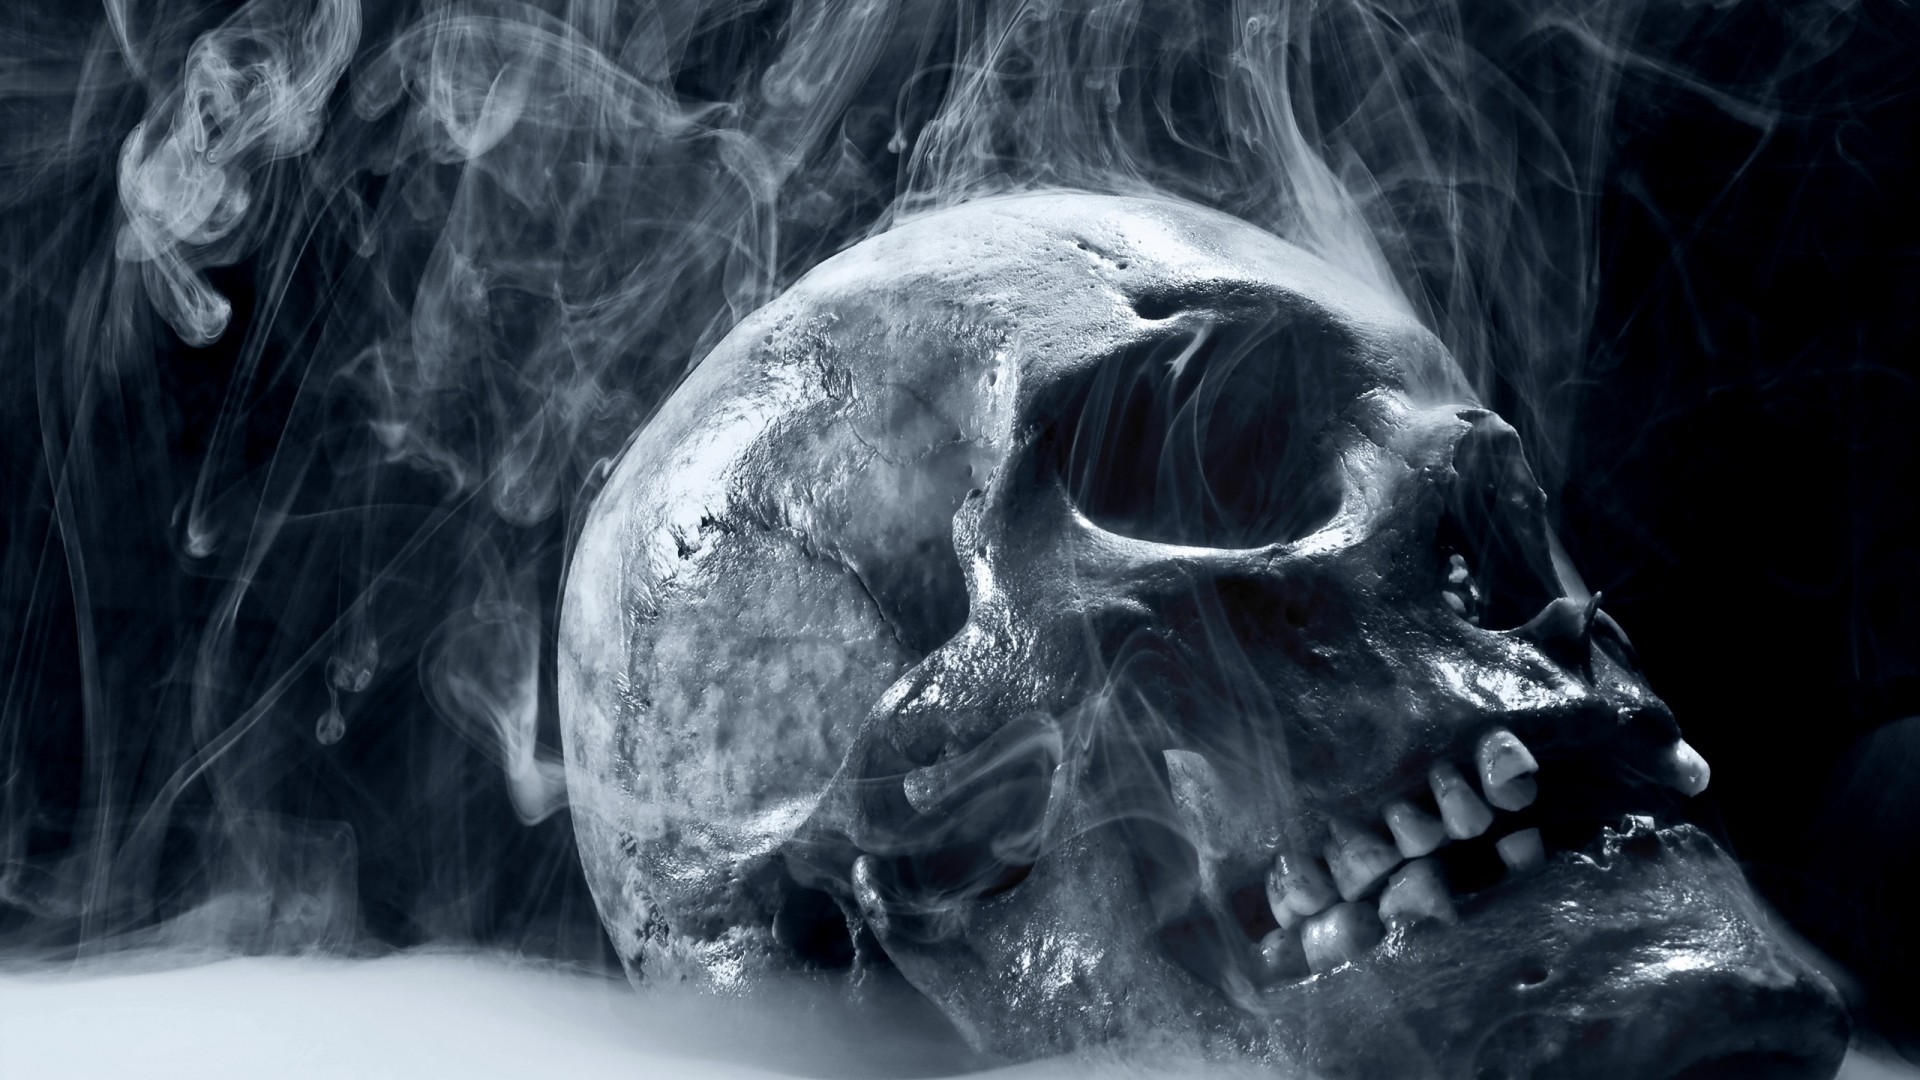 1920x1080 Scary Skull Wallpapers For Desktop HD Wallpaper Res .